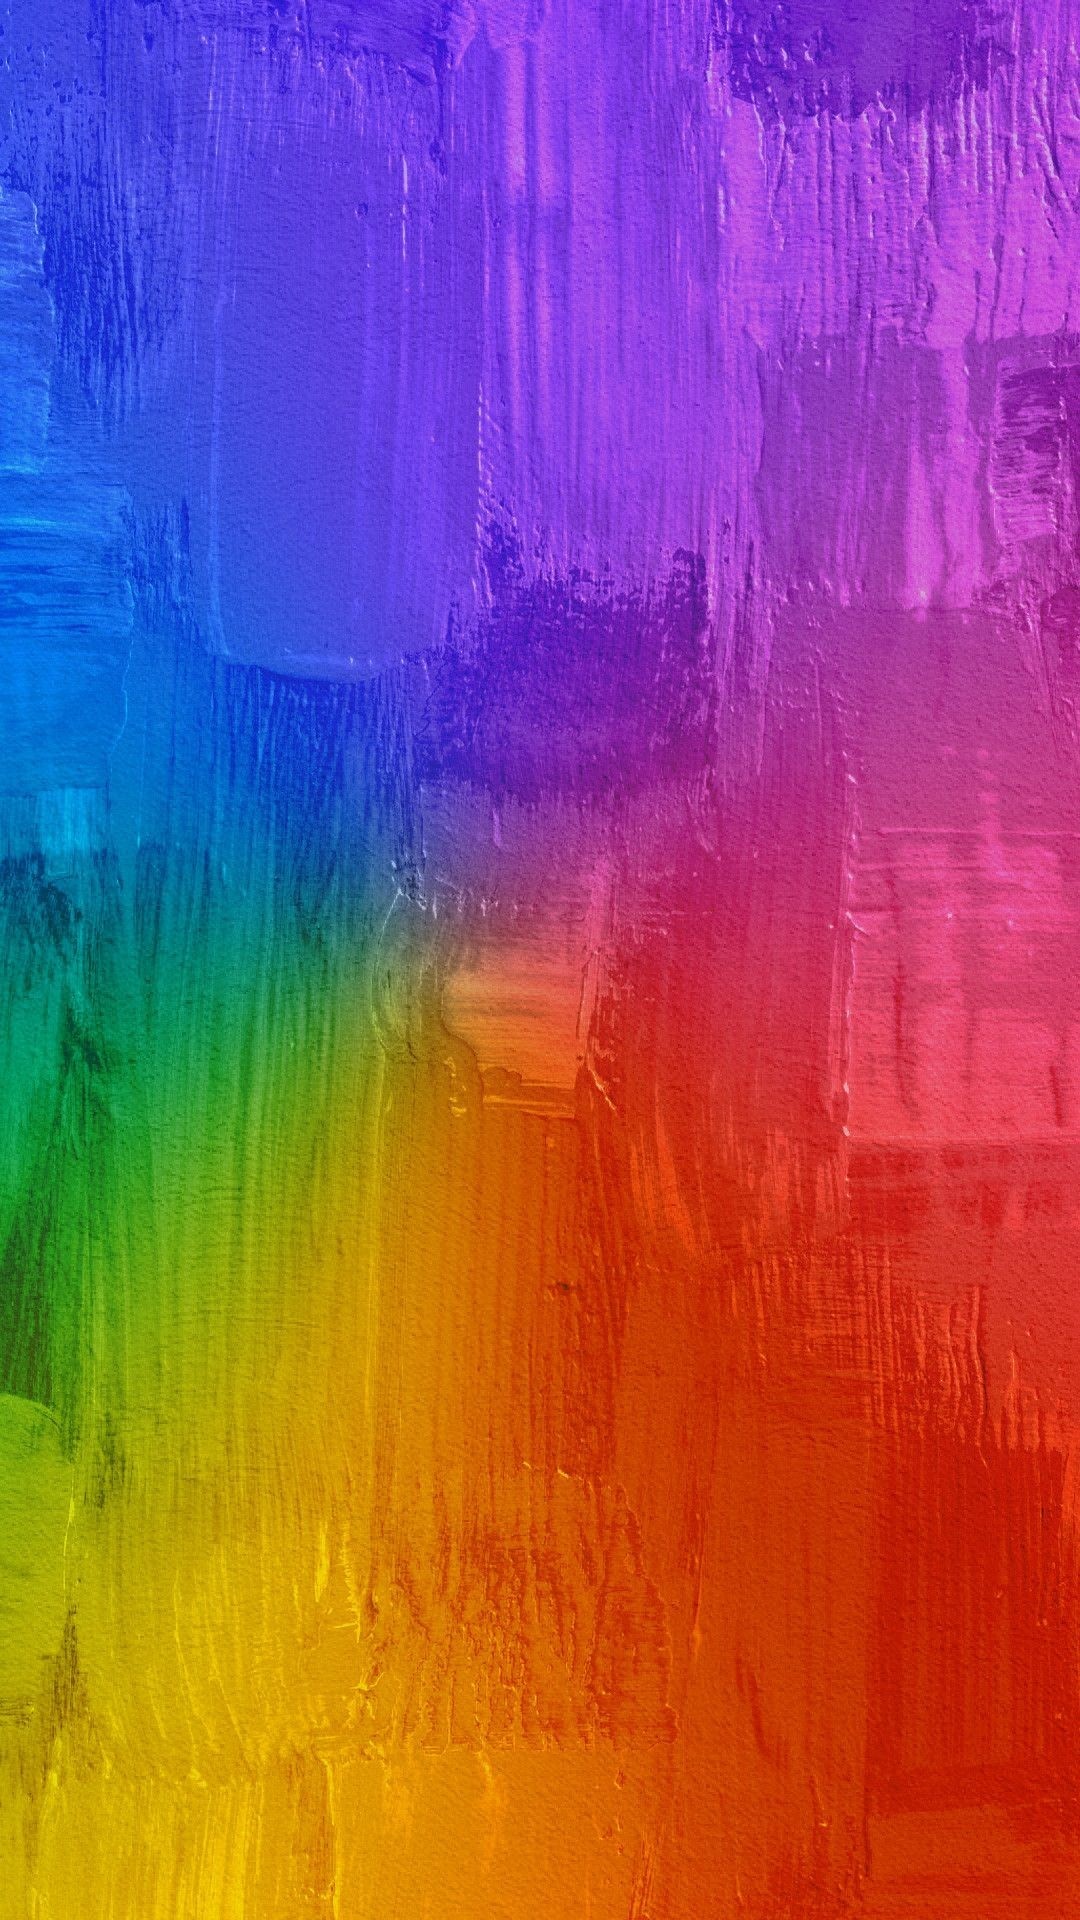 Bright neon rainbow backgrounds, Neon glow effects, Luminous and vibrant, Eye-catching colors, 1080x1920 Full HD Handy